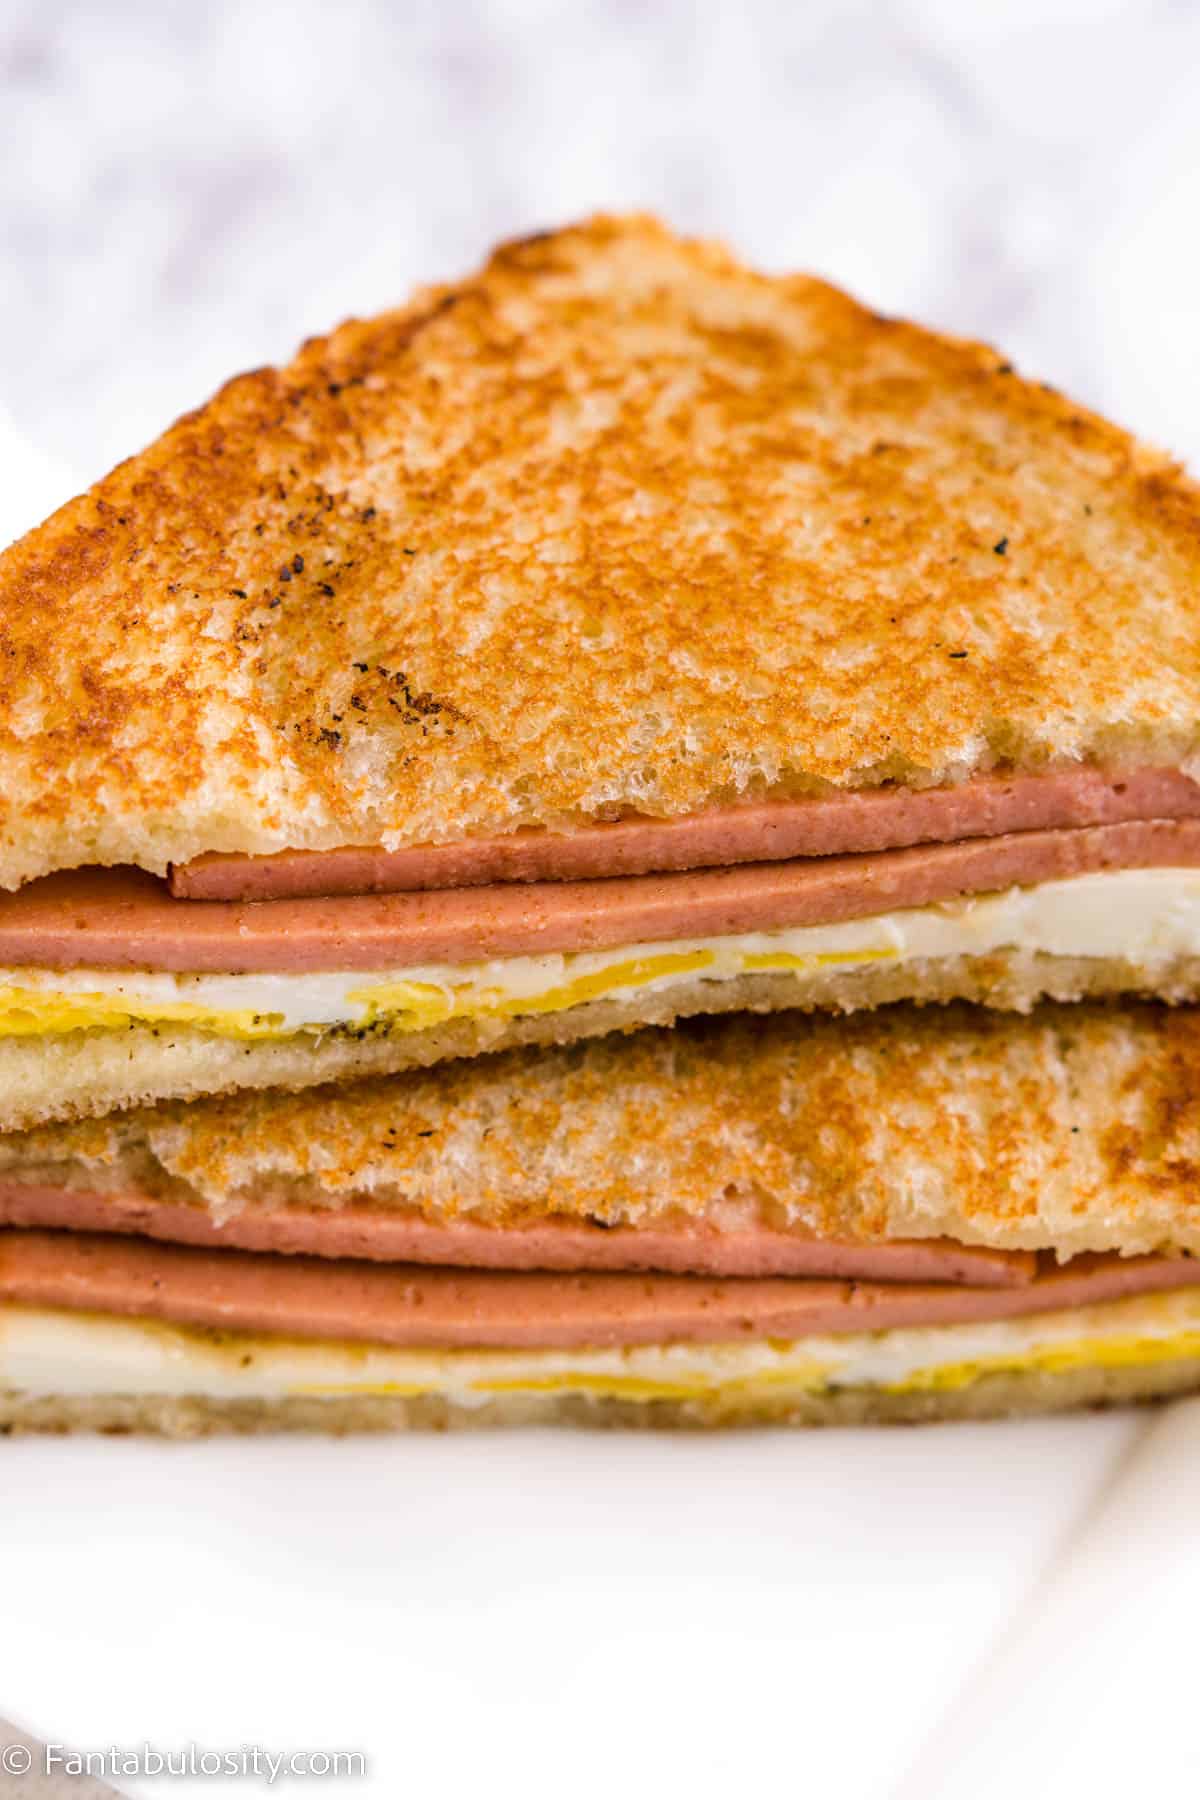 Fried Bologna and Egg Sandwich, cut in half, sitting on white plate